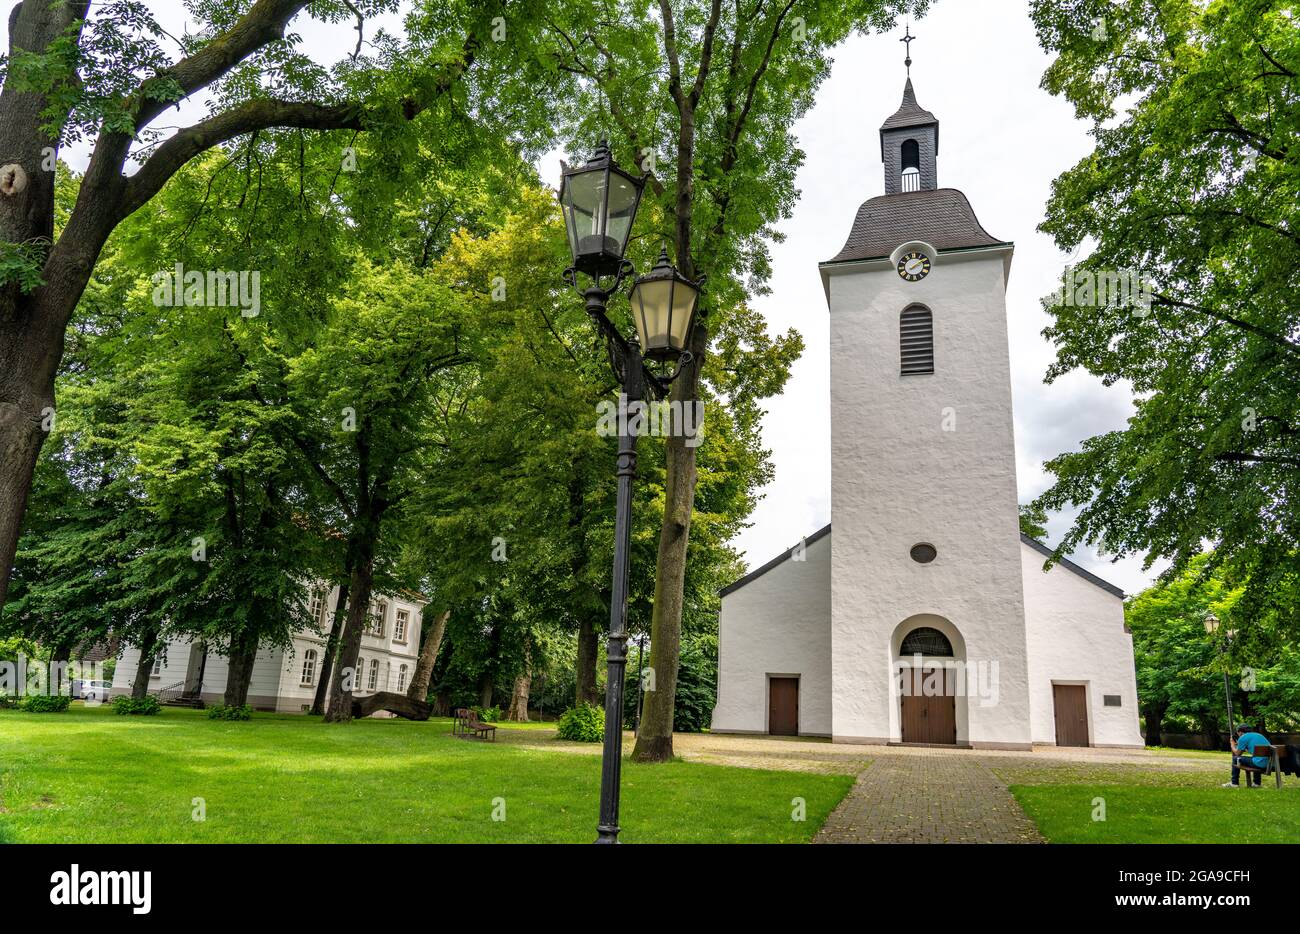 Duisburg Friemershein, old village center, protestant village church, at the church square, NRW, Germany Stock Photo